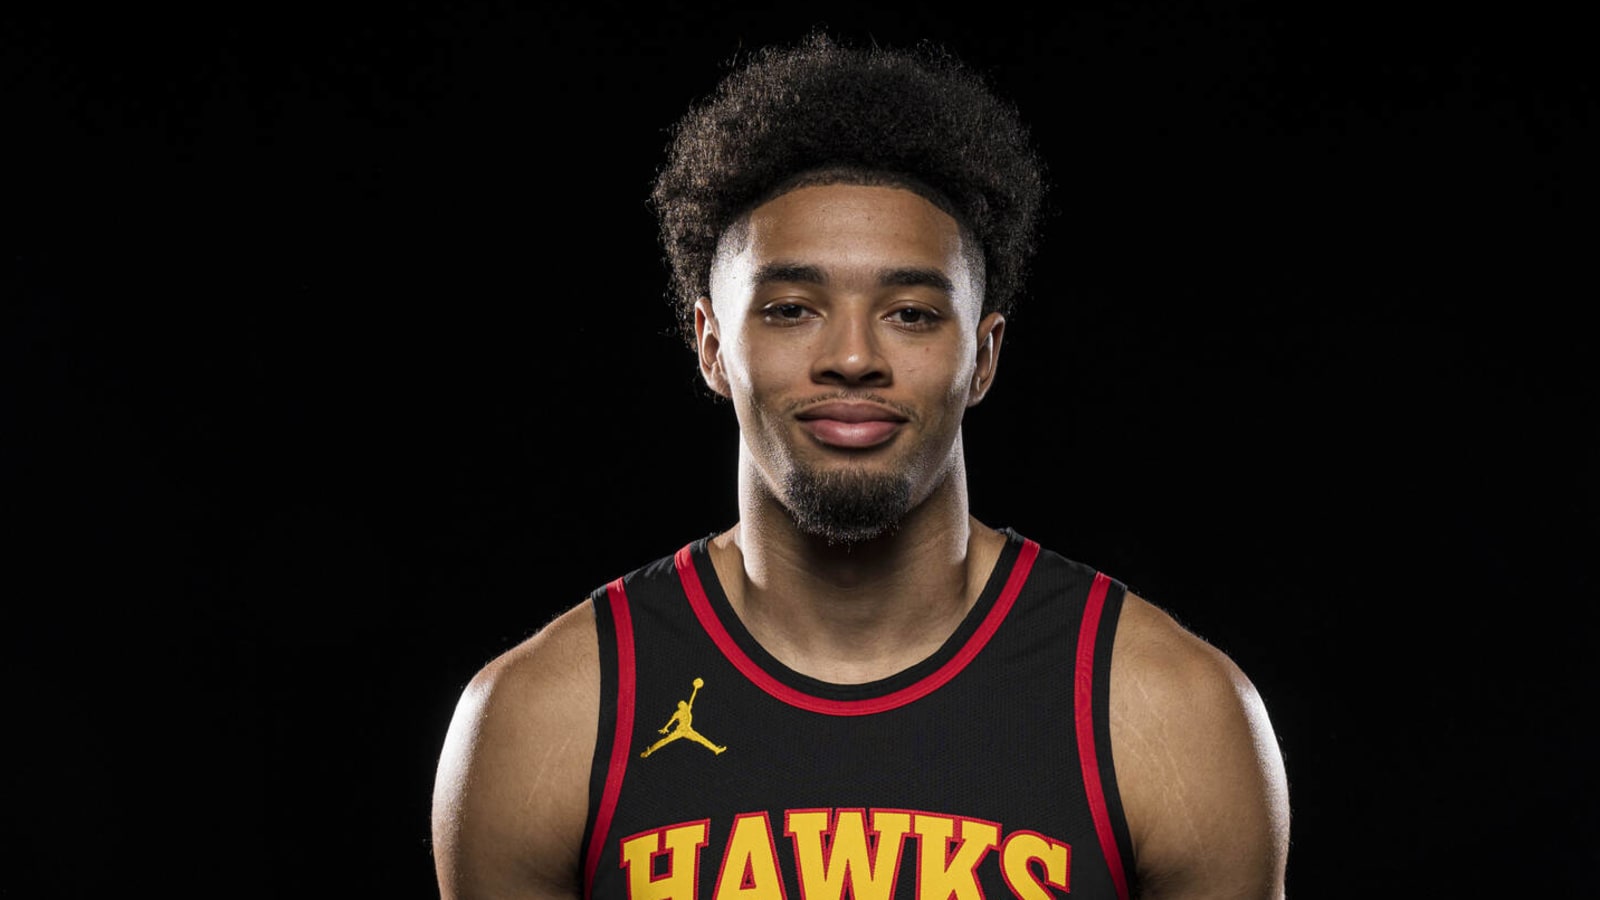 Hawks rookie wing underwent ankle surgery